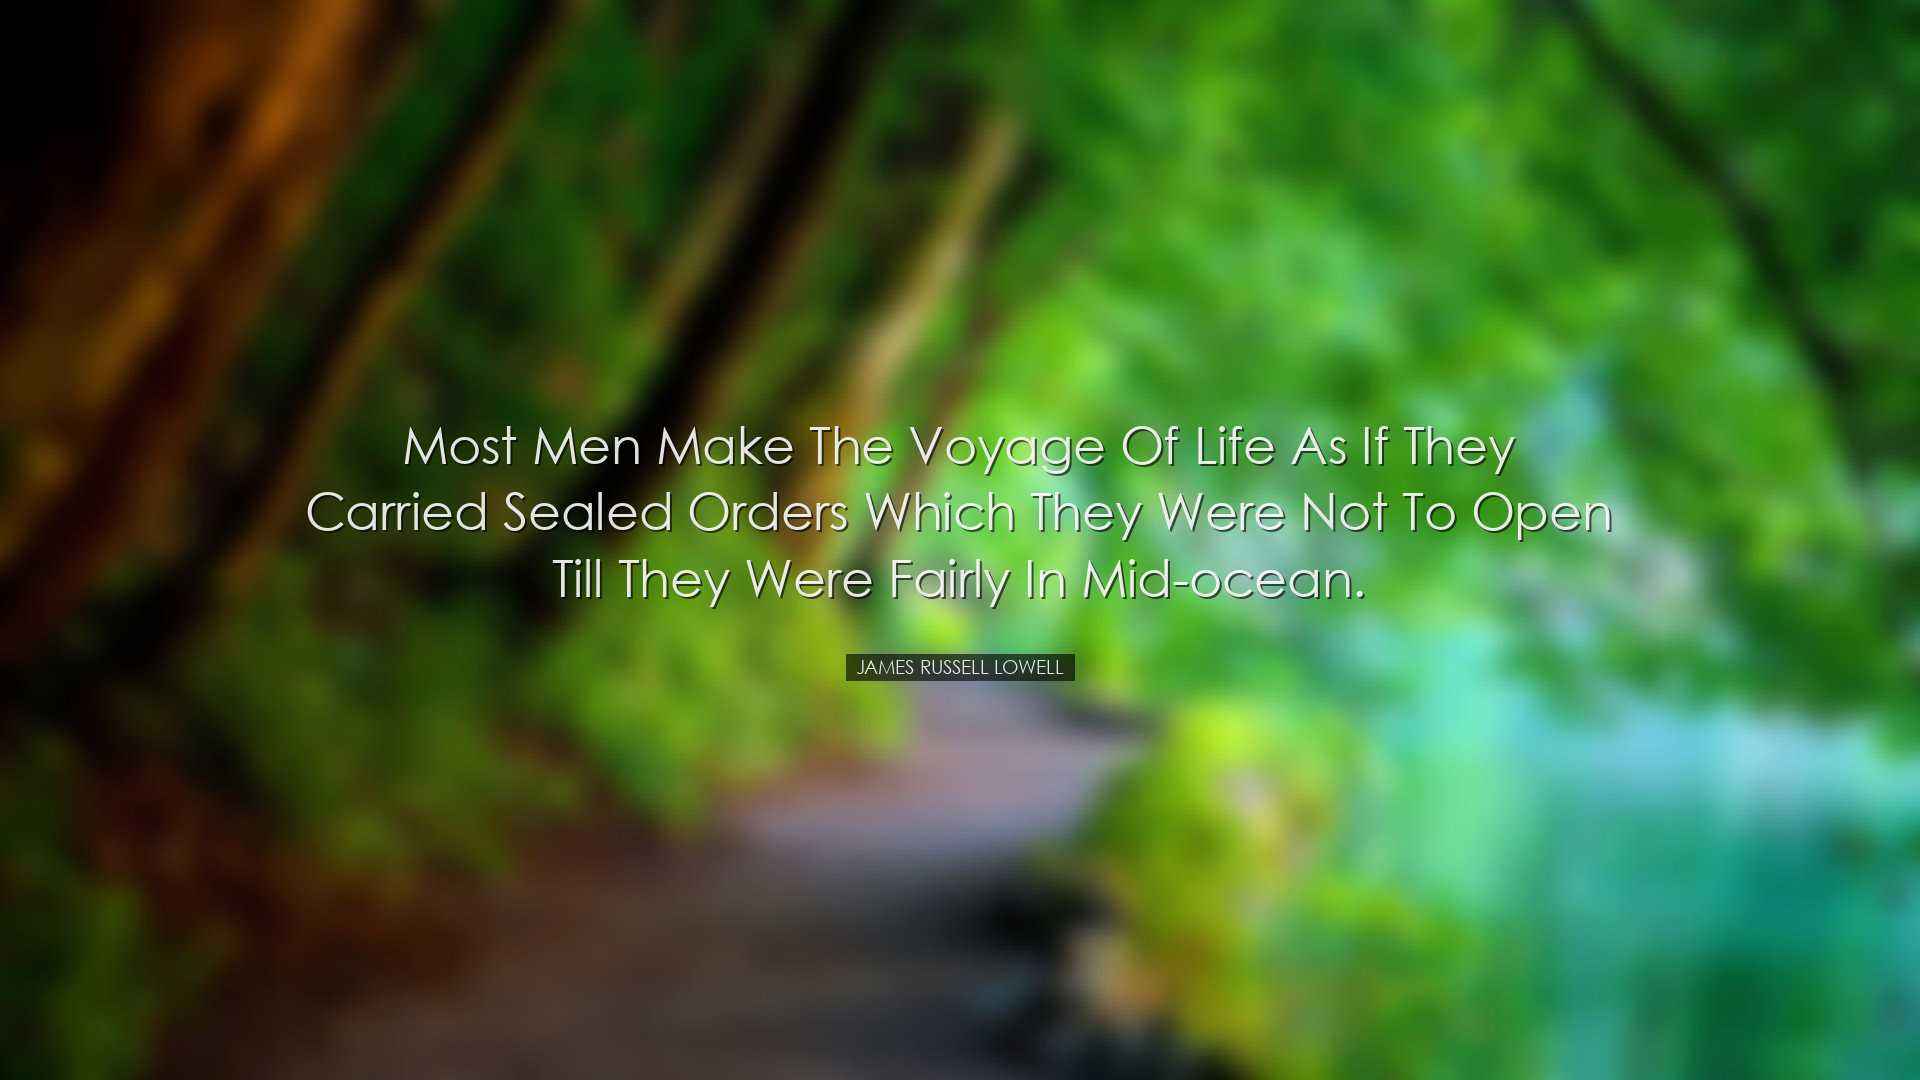 Most men make the voyage of life as if they carried sealed orders